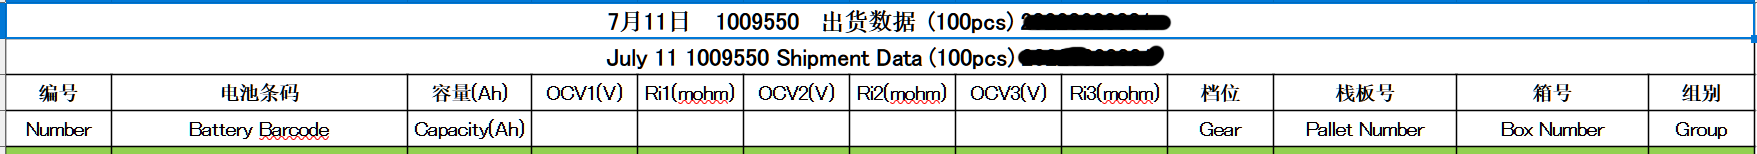 Translated Spreadsheet from EVE.png